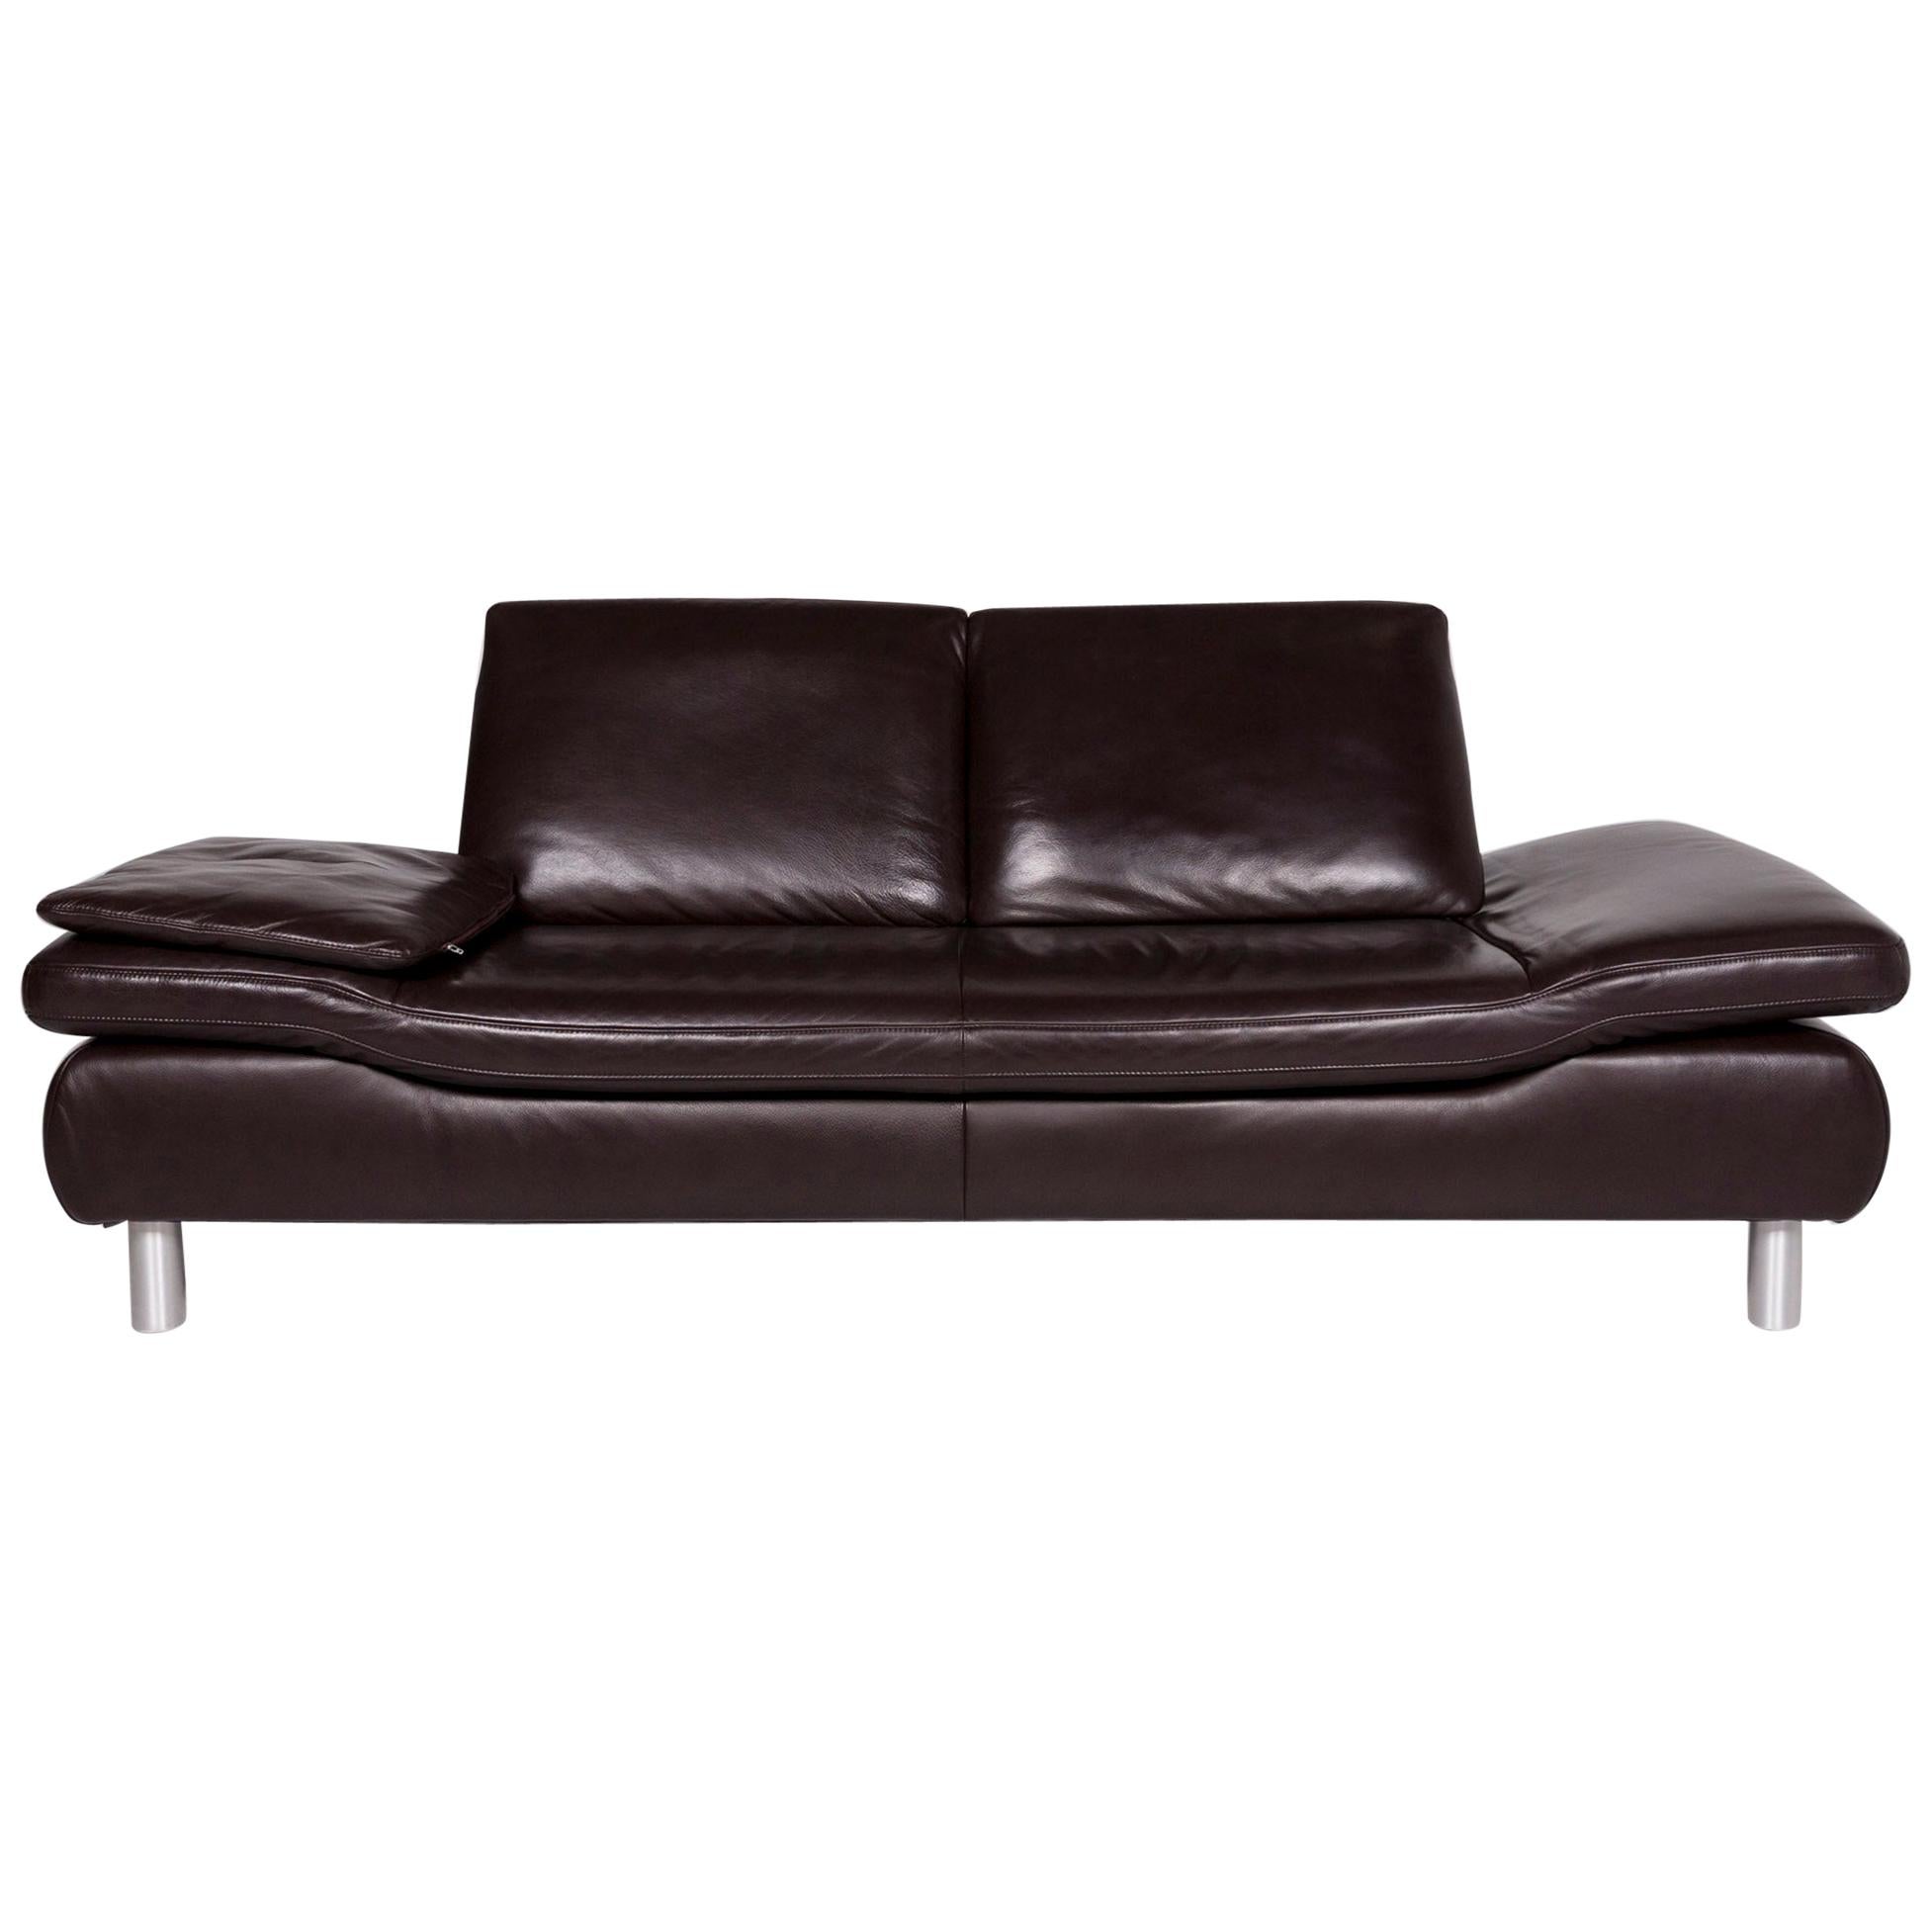 Koinor Rossini Leather Sofa Brown Dark Brown Function Couch For Sale